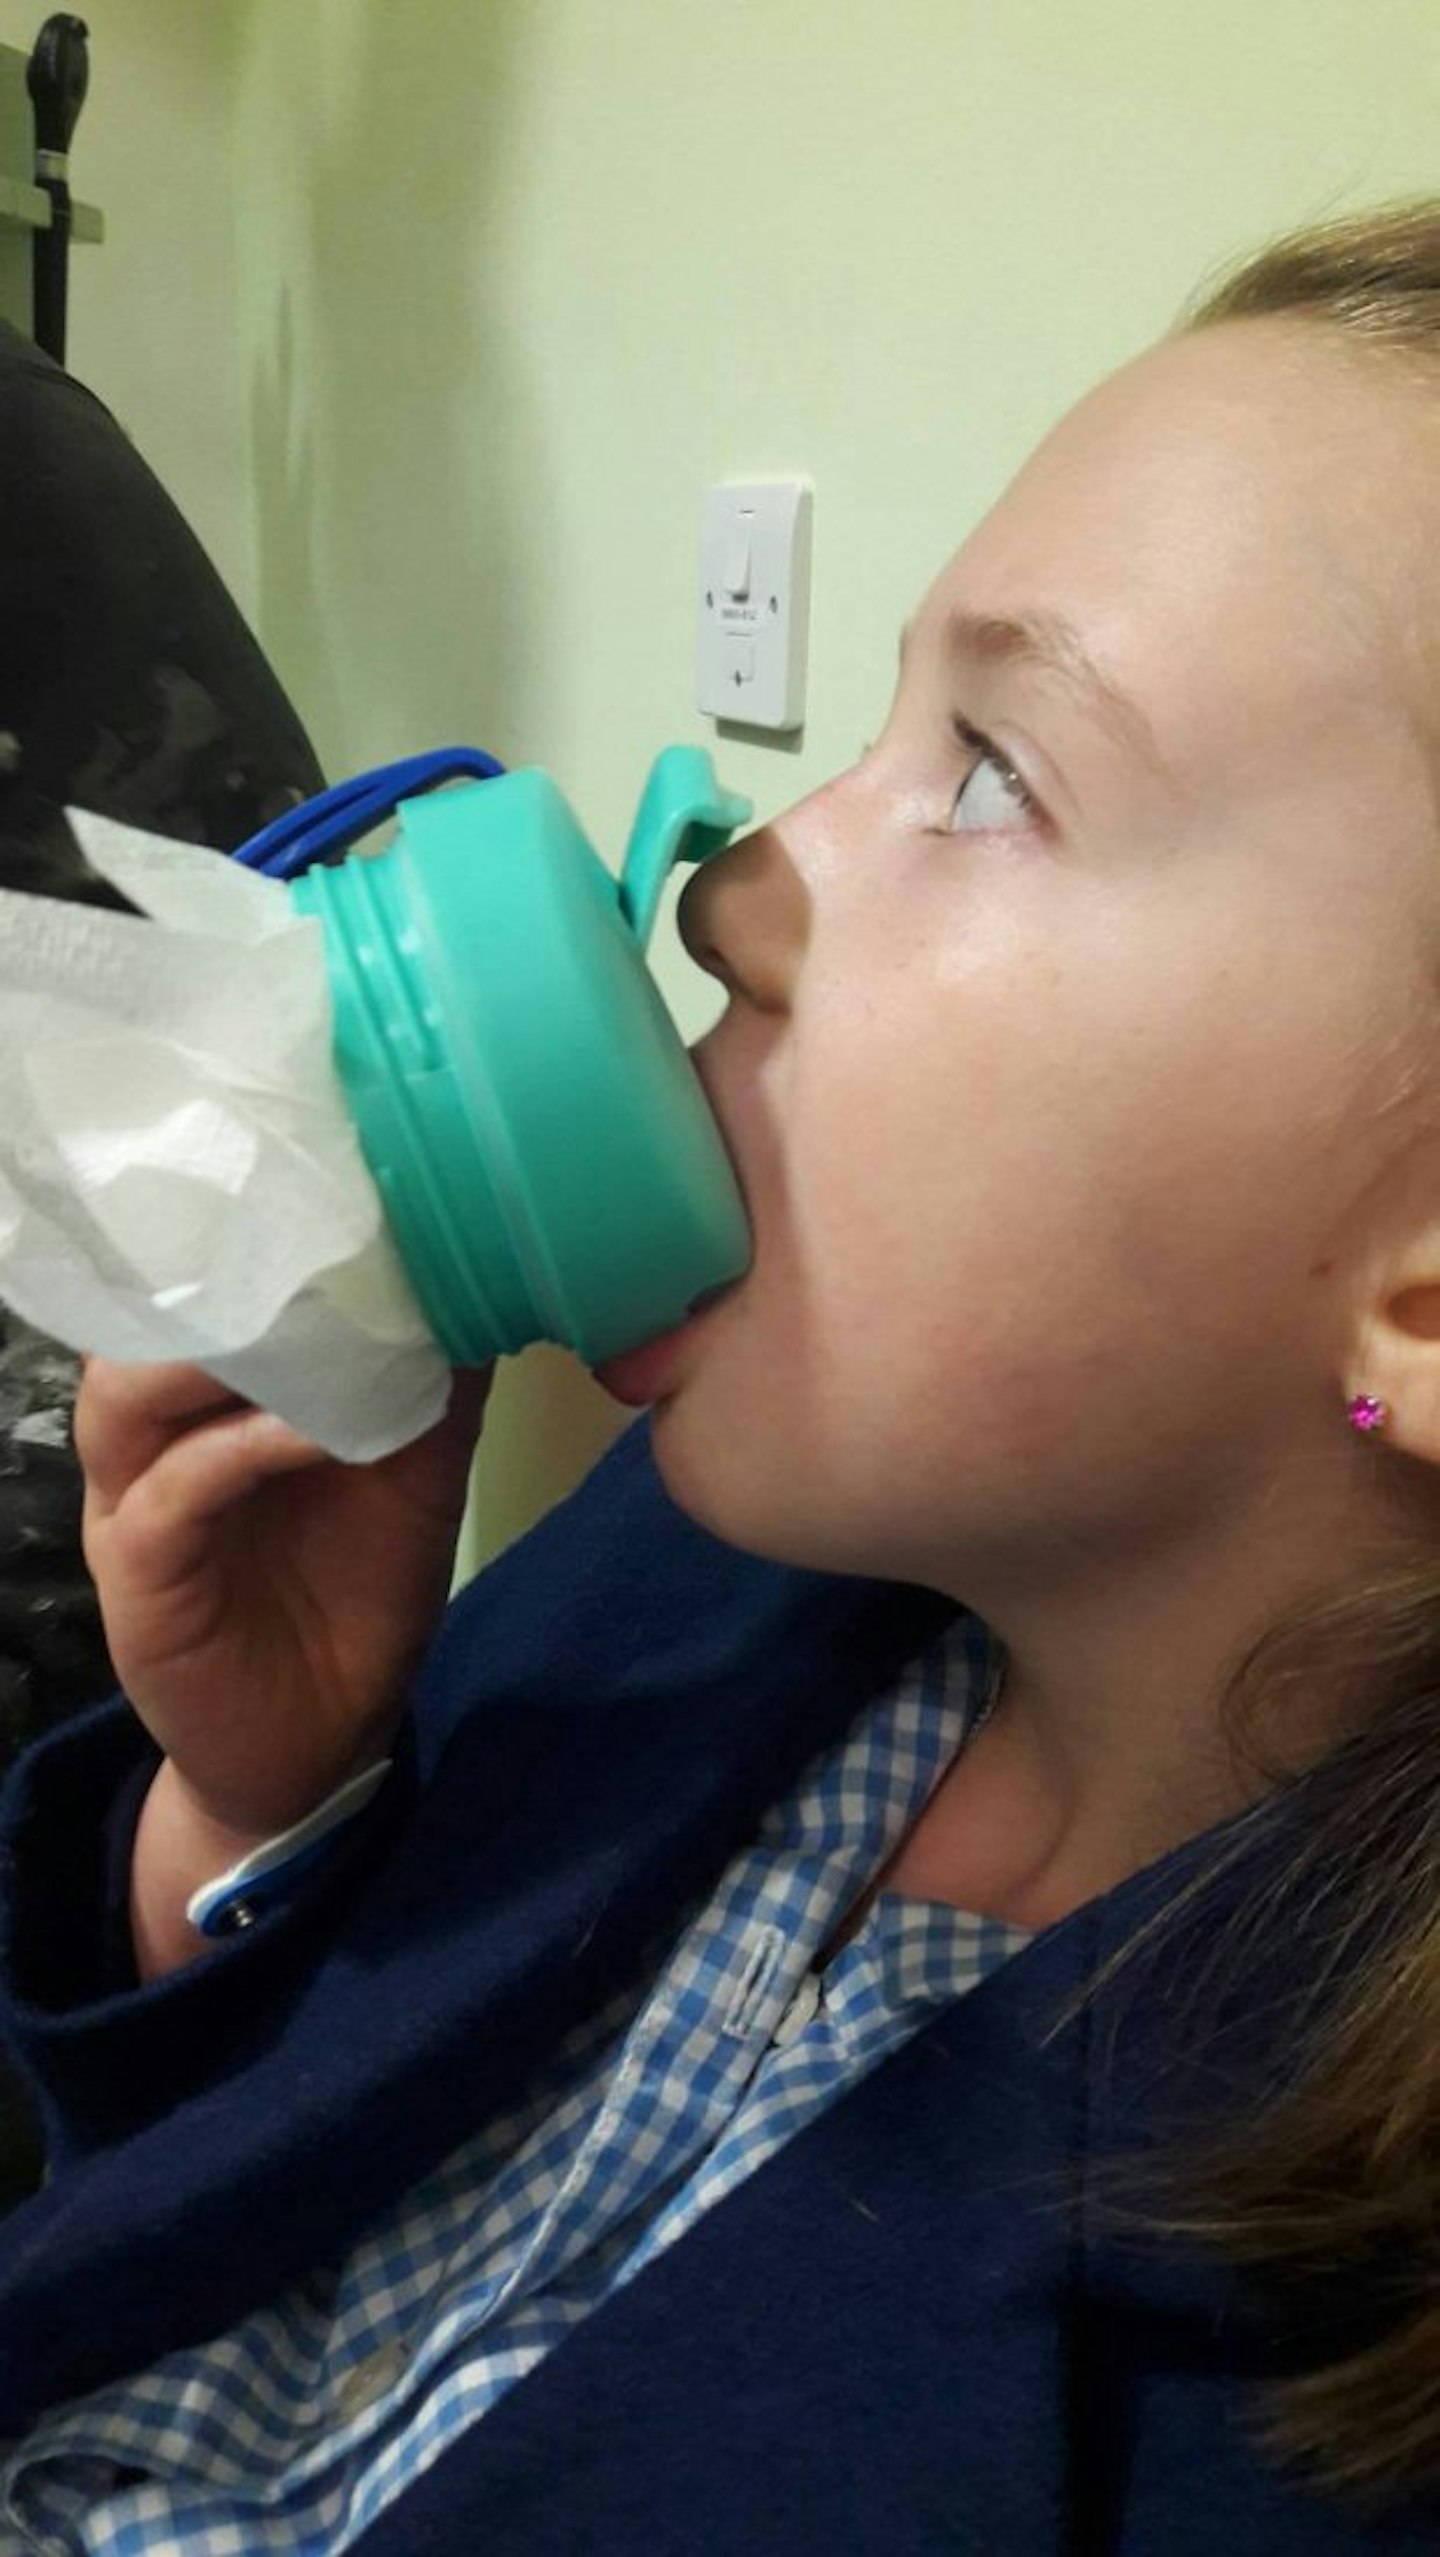 7-year-old-girl-megan-donald-natalie-rushed-hospital-tongue-trapped-disney-cup